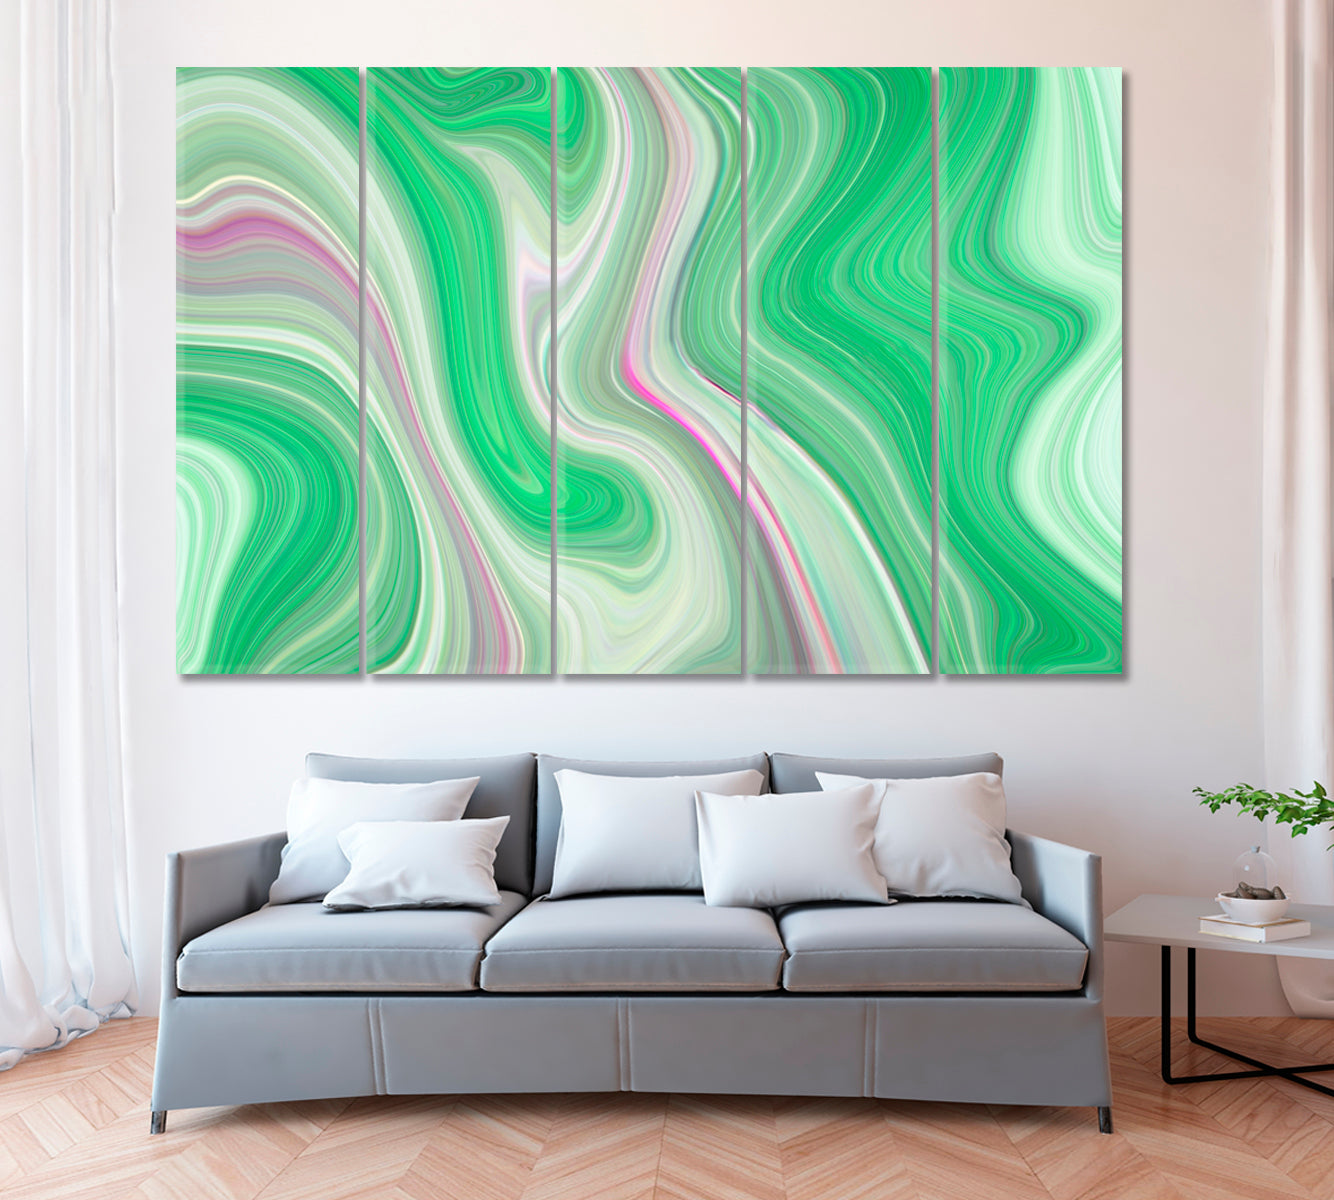 Green Marble Design Canvas Print ArtLexy 5 Panels 36"x24" inches 